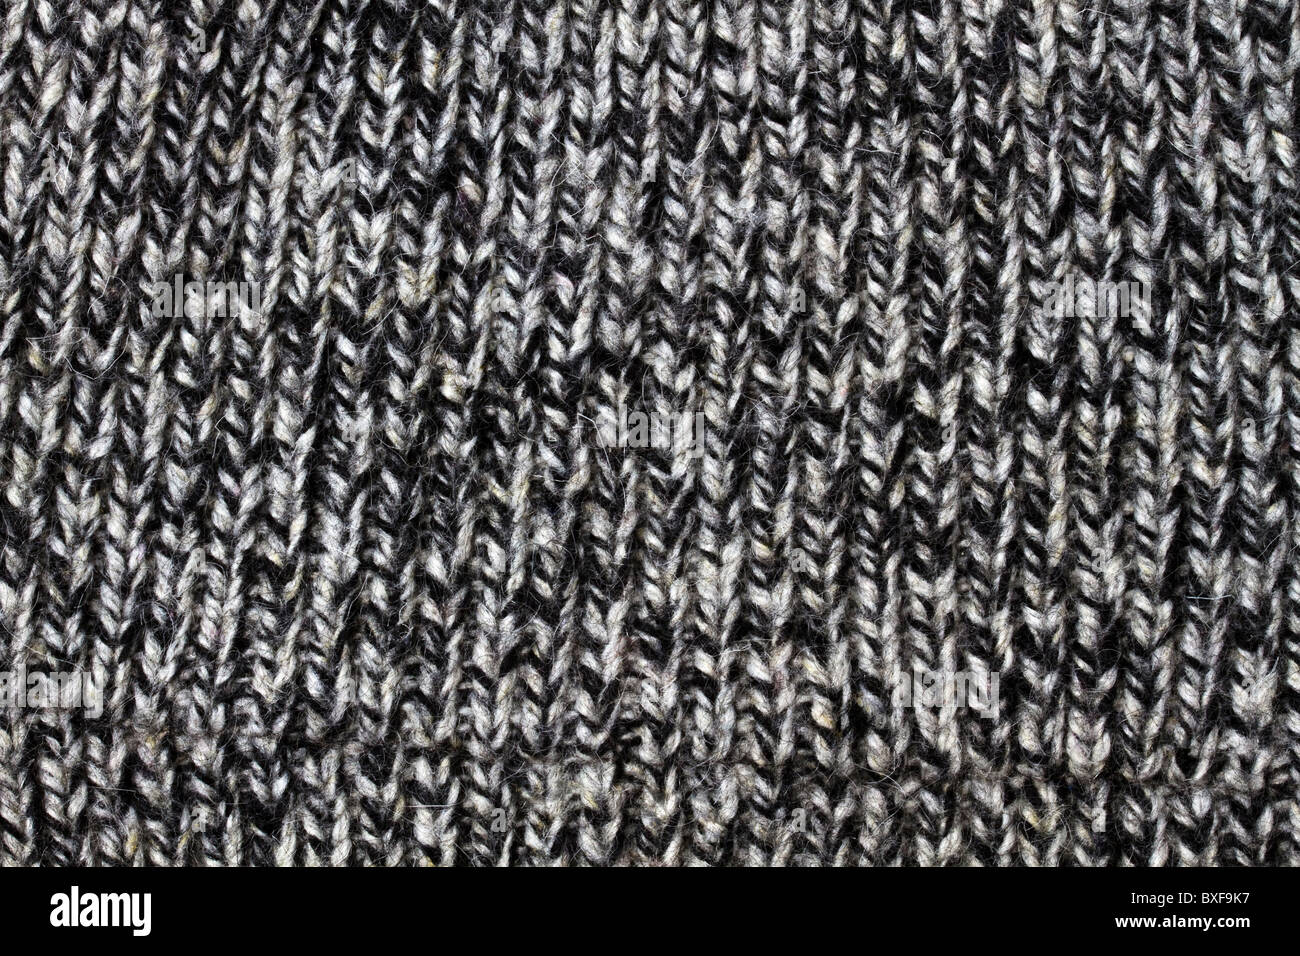 Texture of striped pattern sweater background Stock Photo